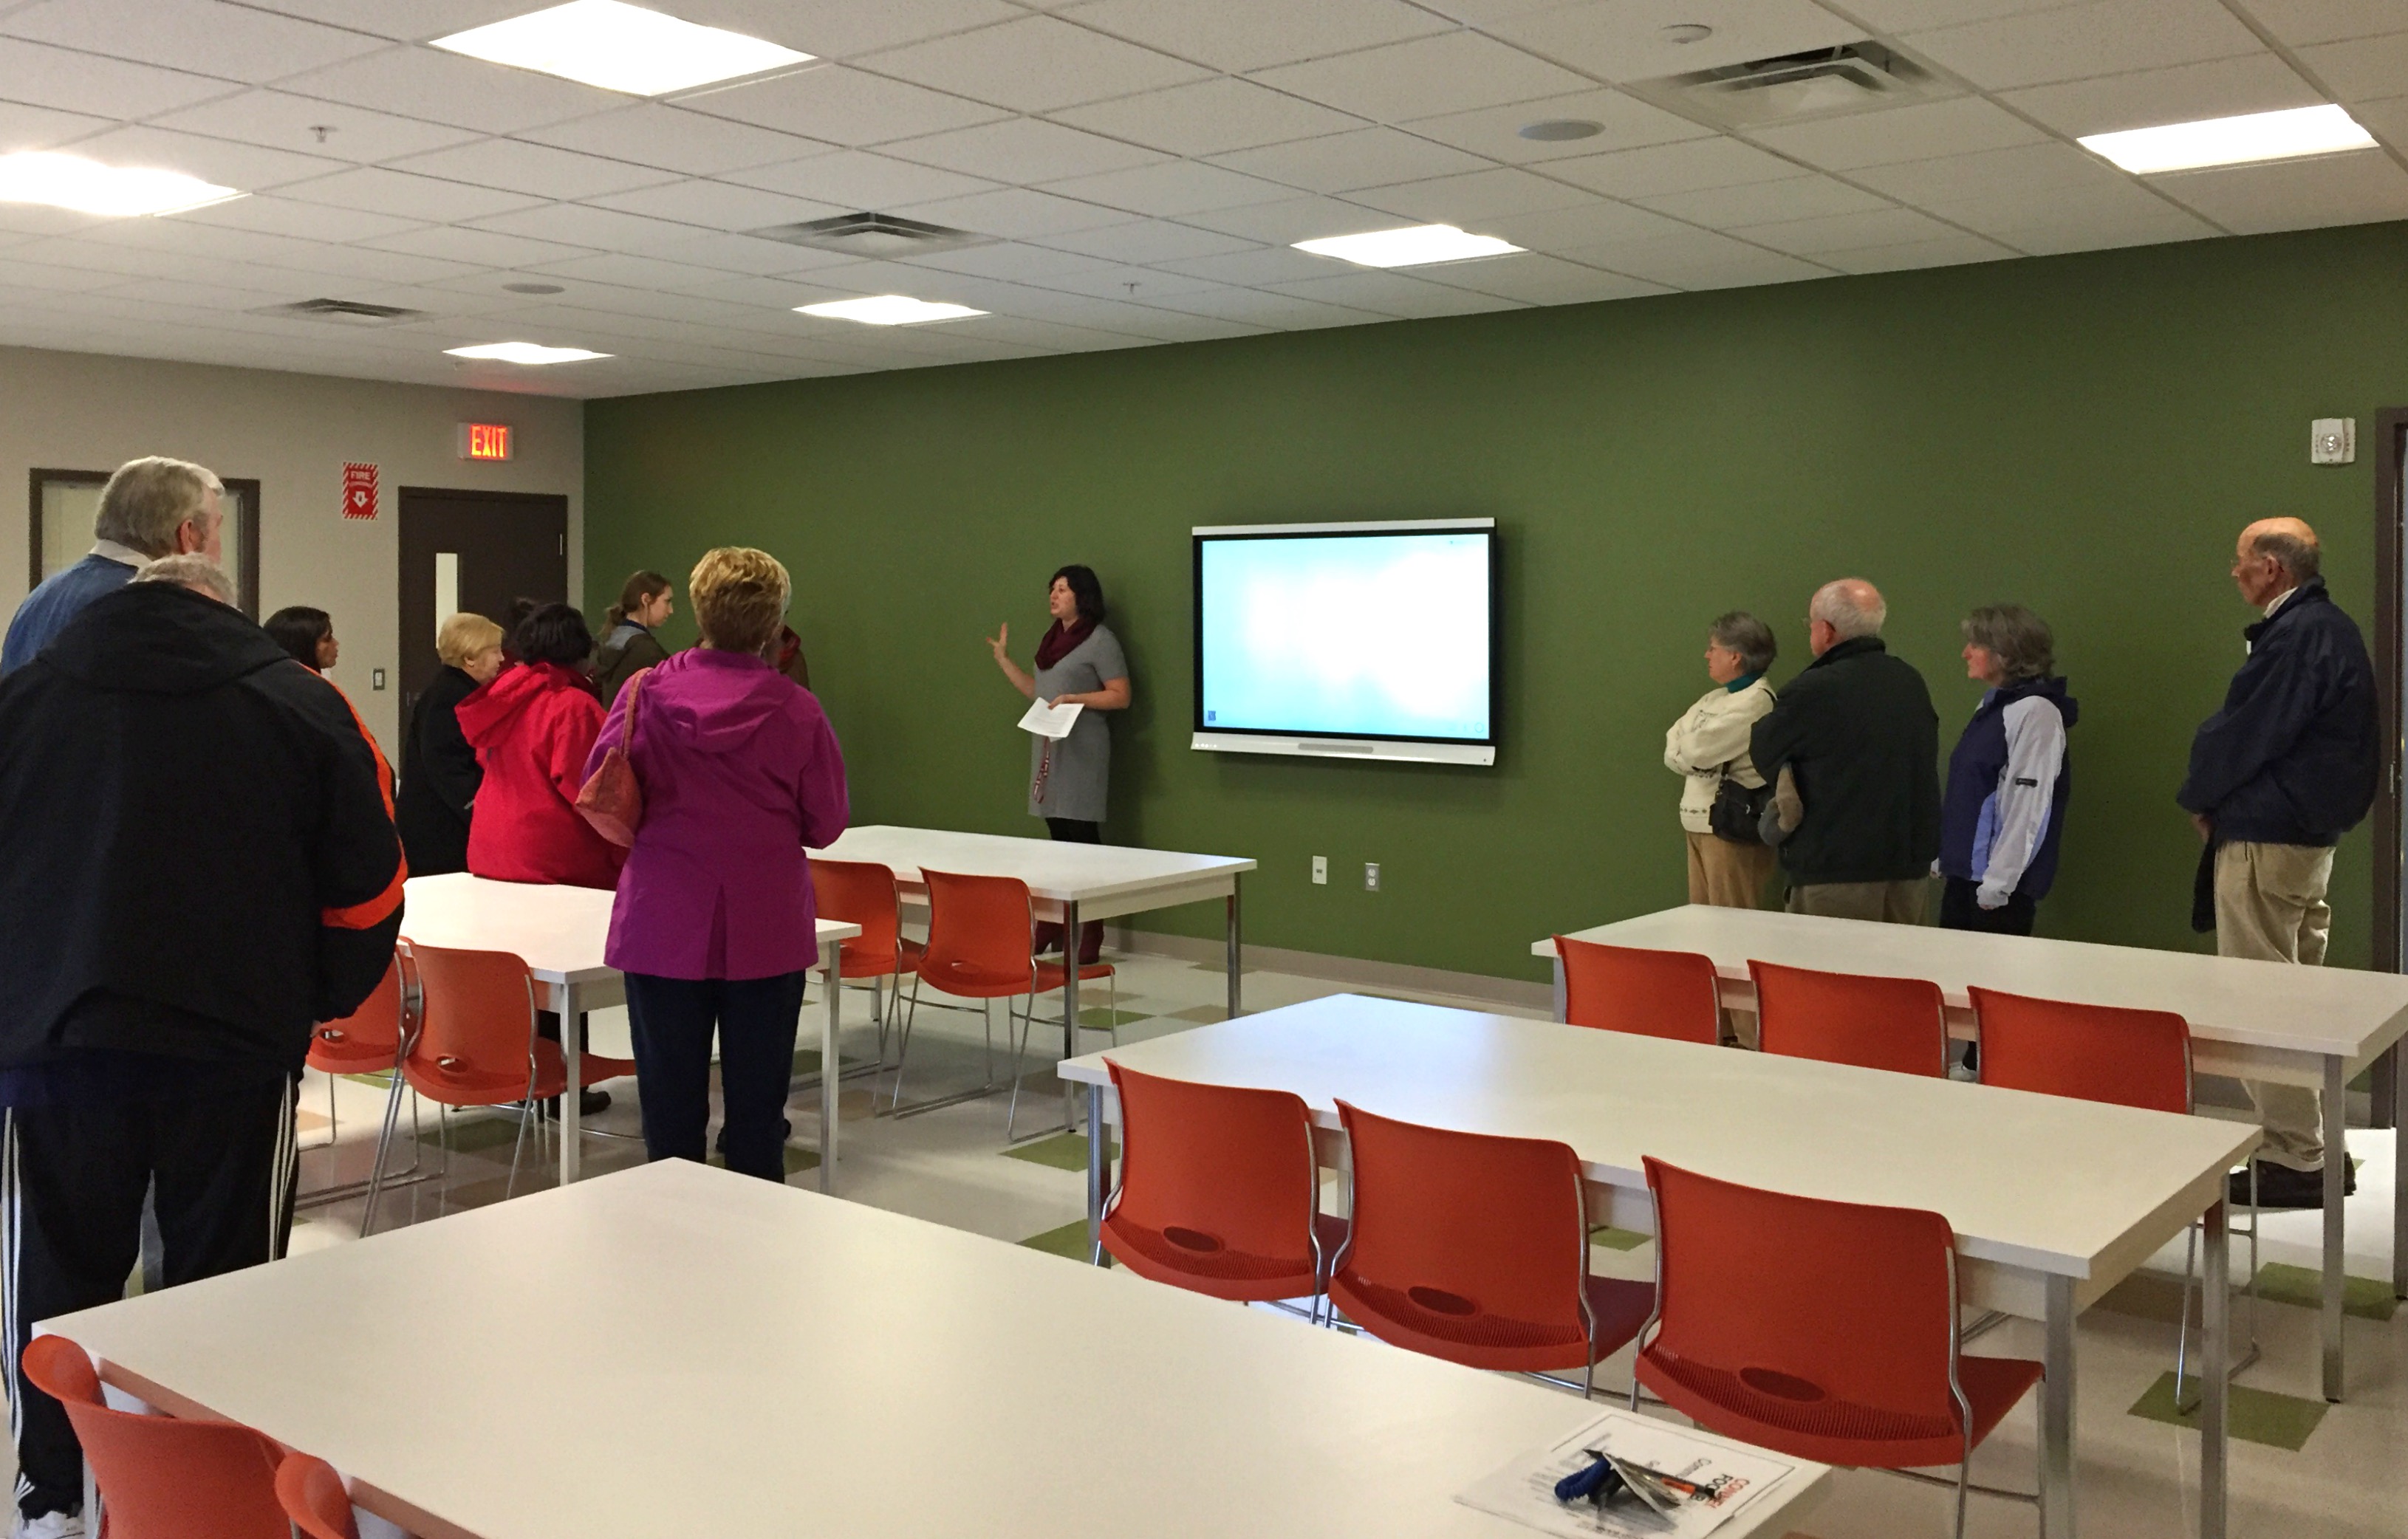 Connecticut Food Bank Director of Community Engagement shows visiting member programs the features of the training room at our new distribution center. The room is used for volunteer orientation and training and is available for member programs and community groups to use as well.